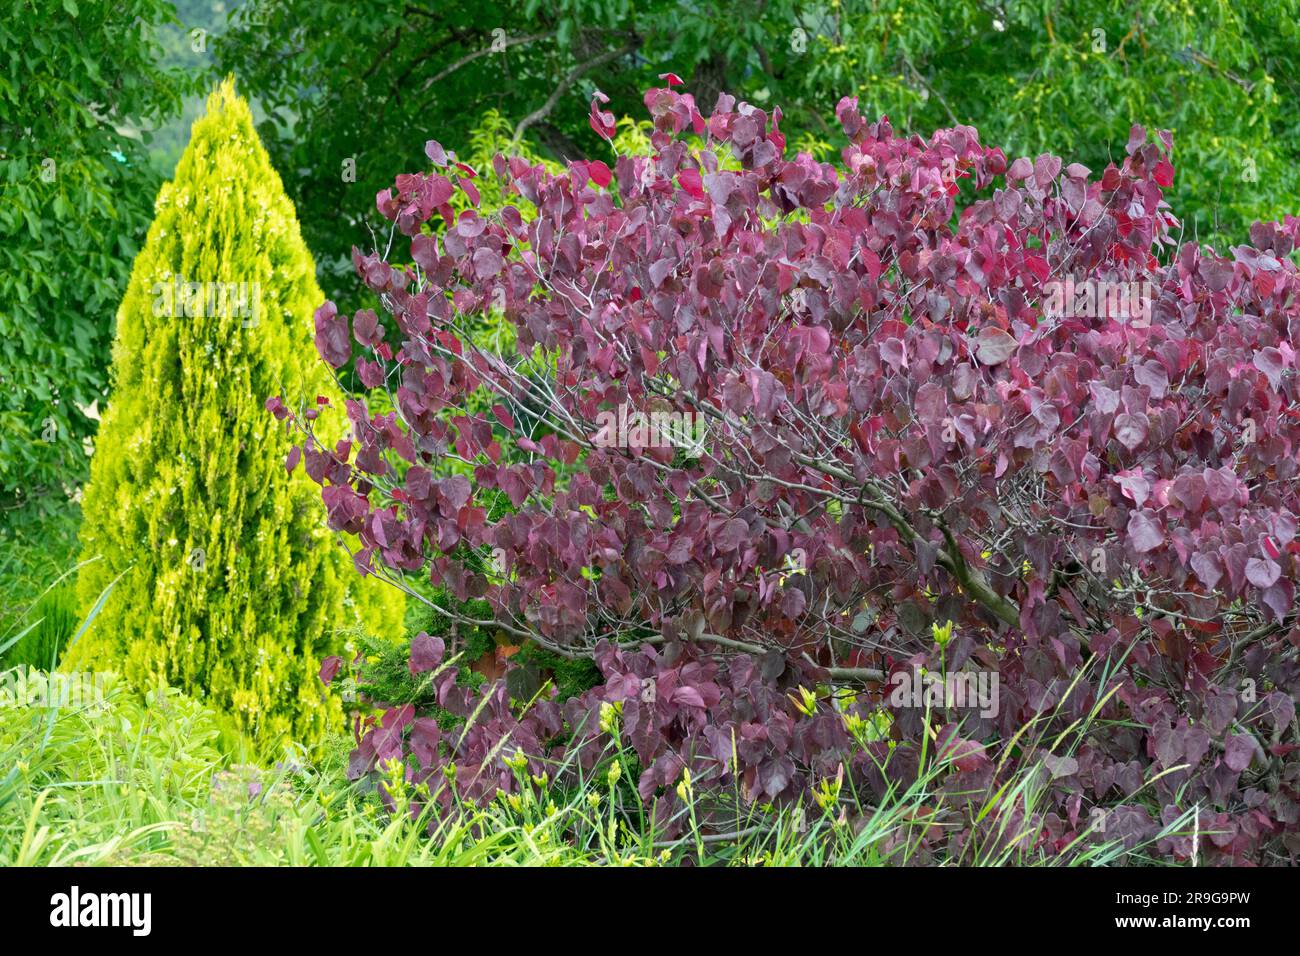 Purple Redbud Cercis canadensis 'Forest Pansy' June Garden Tree Conical Thuja Tree Back Cercis 'Forest Pansy' Nature Eastern Redbud Foliage Leaves Stock Photo